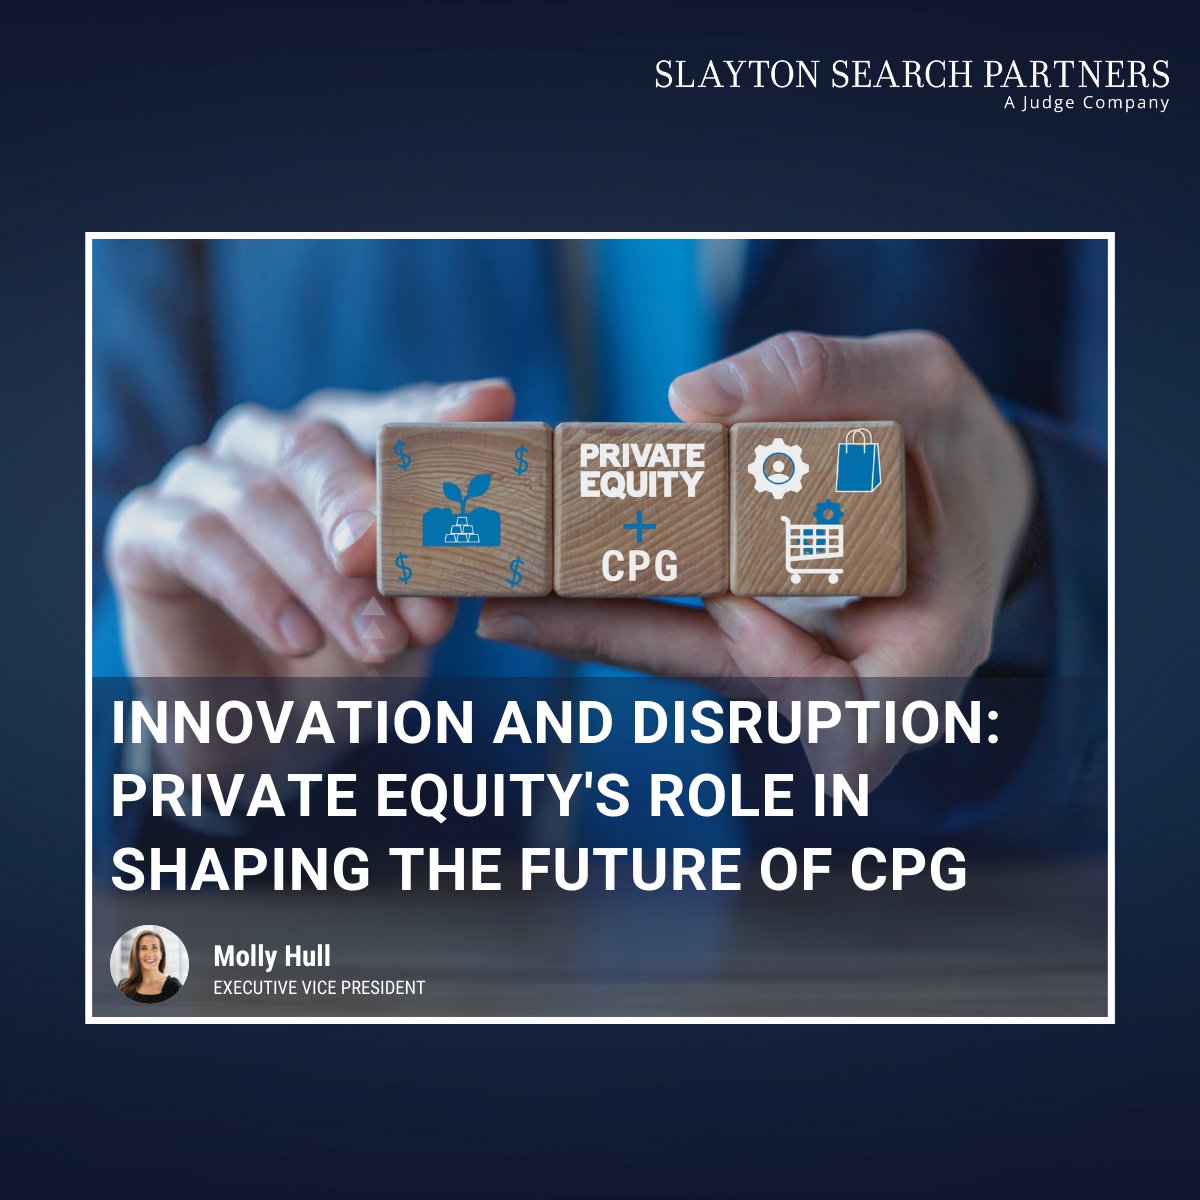 What might the future of CPG look like? Based on our research, the evolution of the industry seems to occur along two interconnected paths: one of sustainability and one of digital transformation. Read more here: hubs.ly/Q02lkGTt0 #SlaytonSearchPartners #CPG #FutureOfCPG